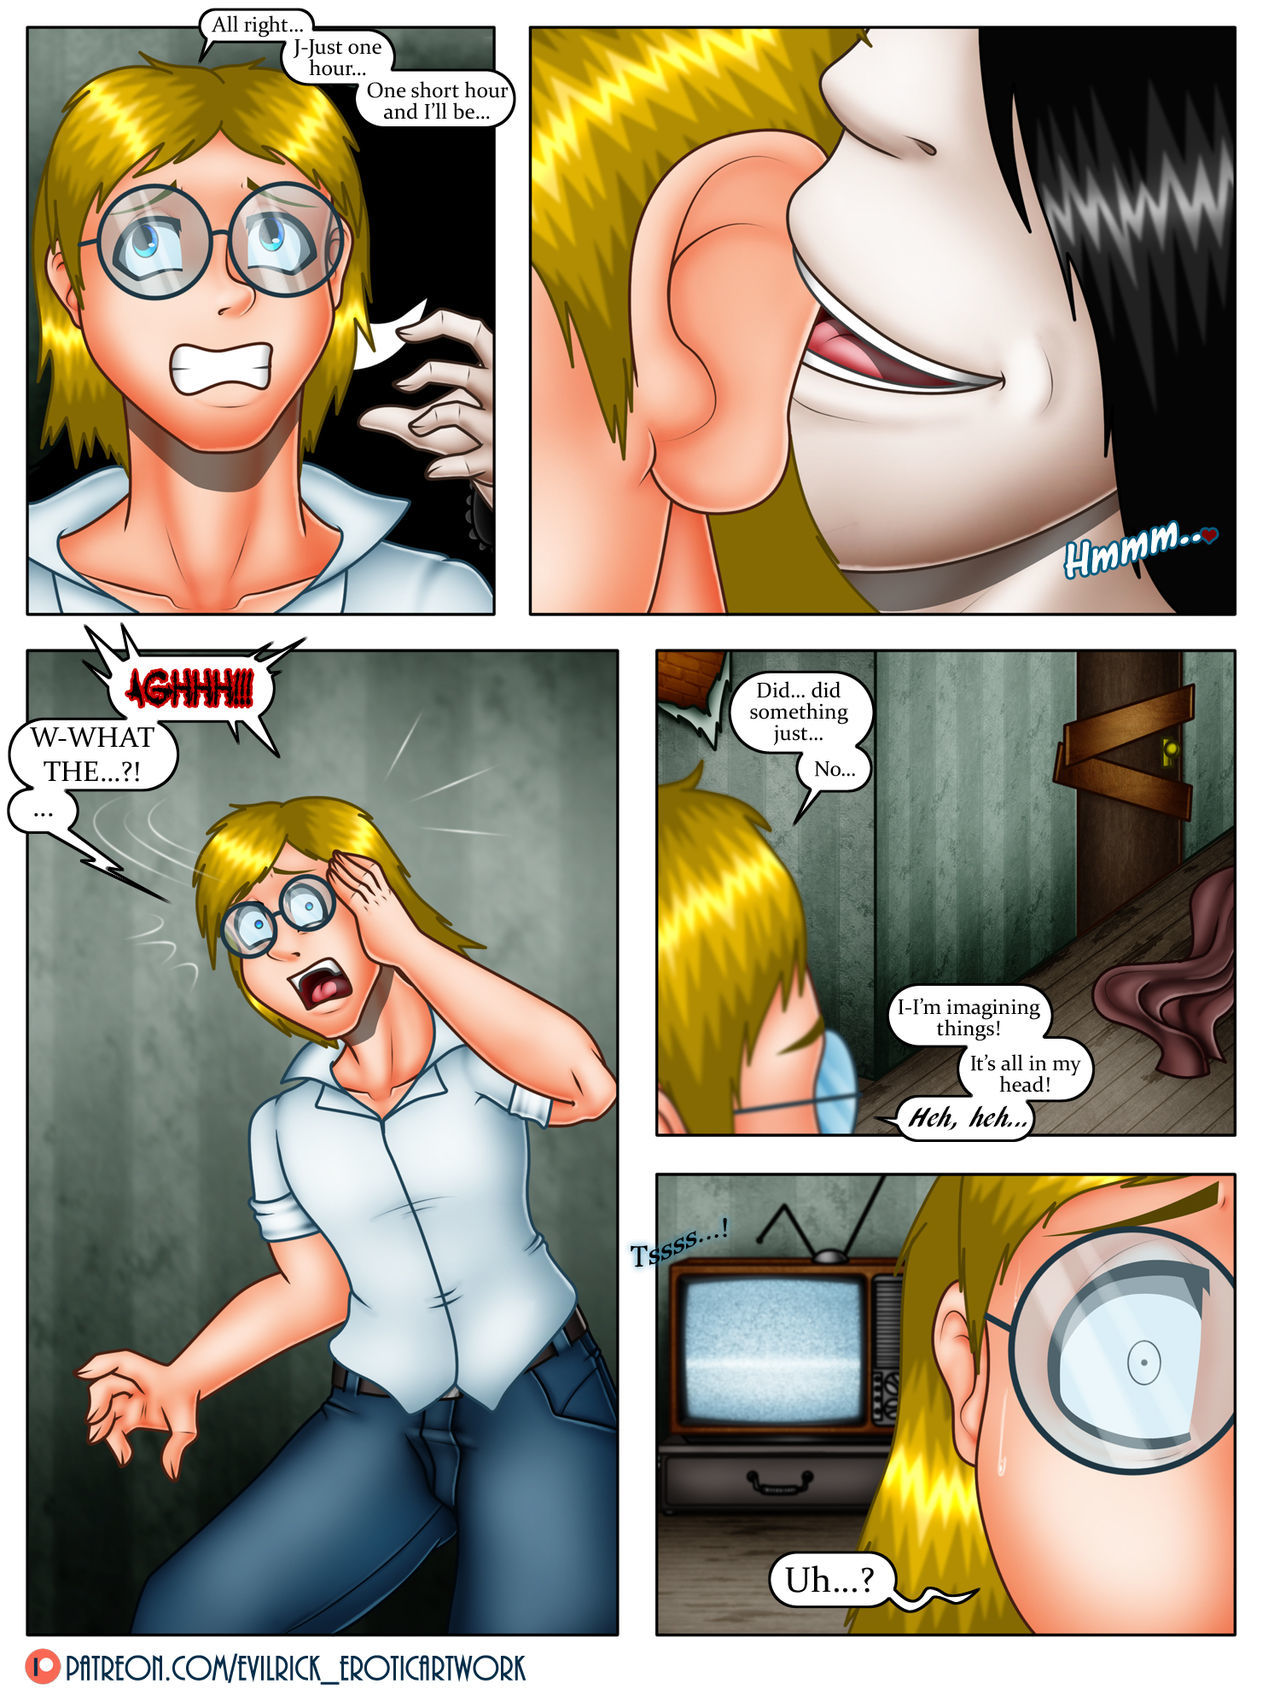 Paranormal Activity The Ring by Evil Rick page 5